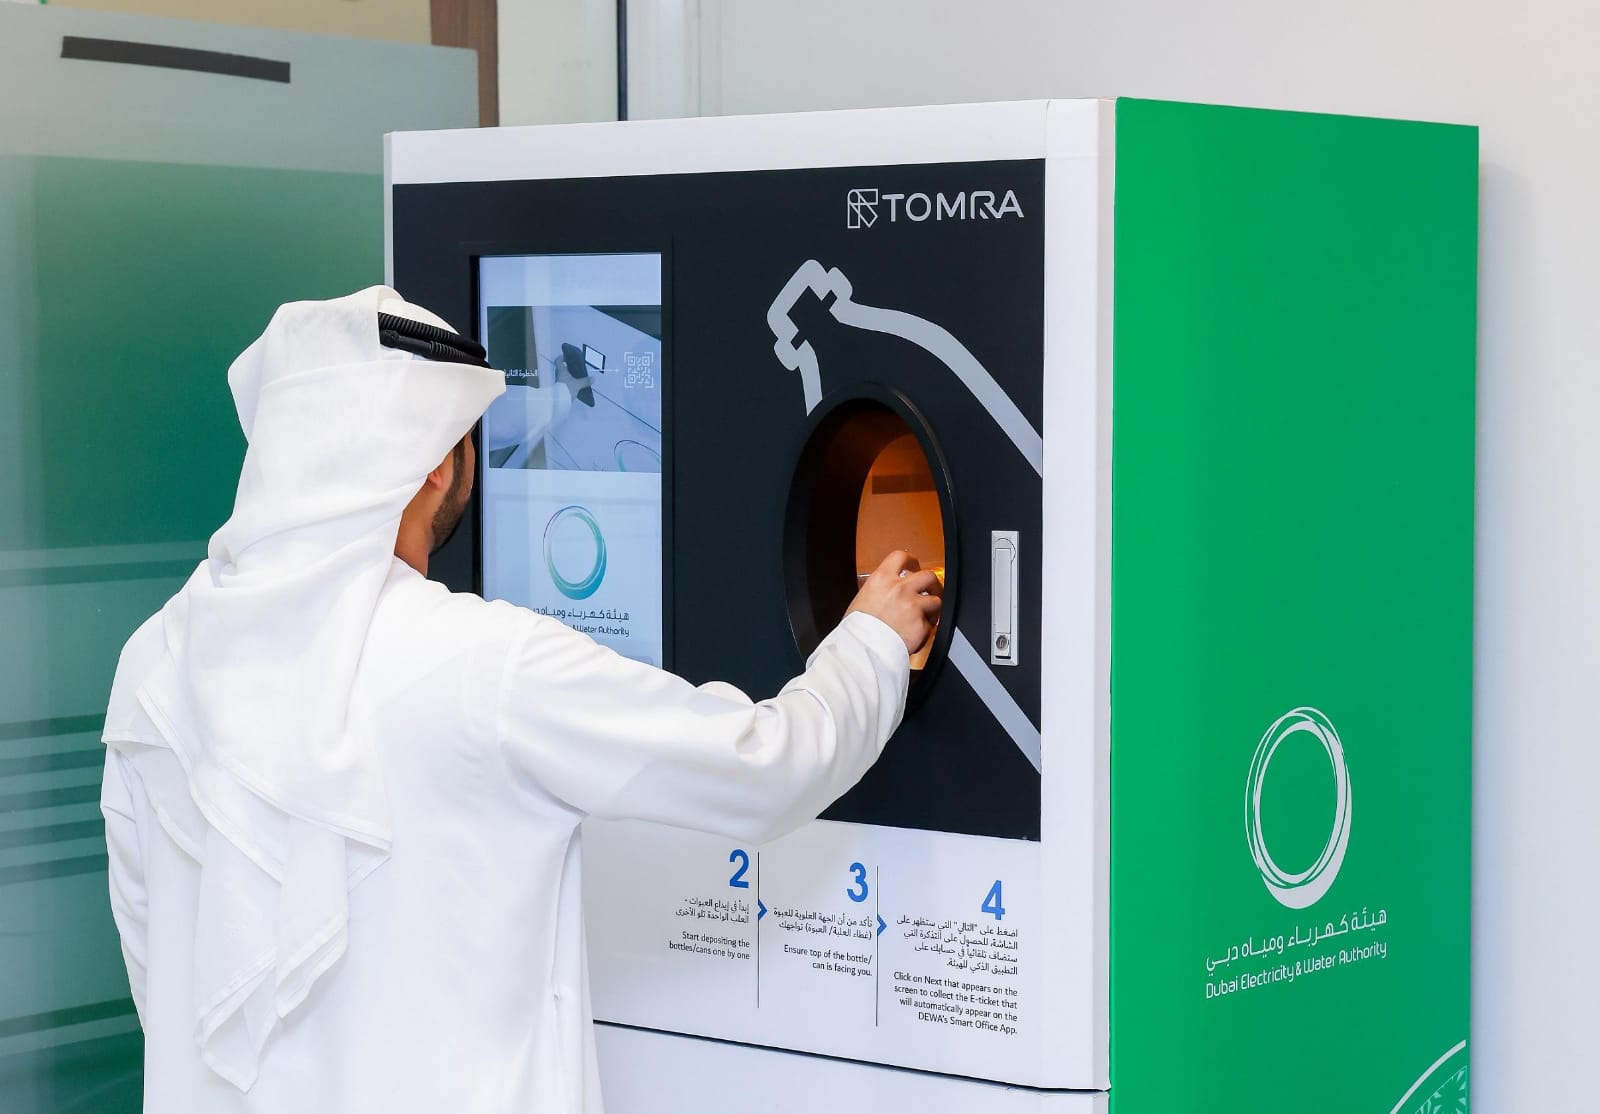 DEWA employees lead the recycling revolution, saving over 7.1 tonnes of plastic bottles and aluminium cans